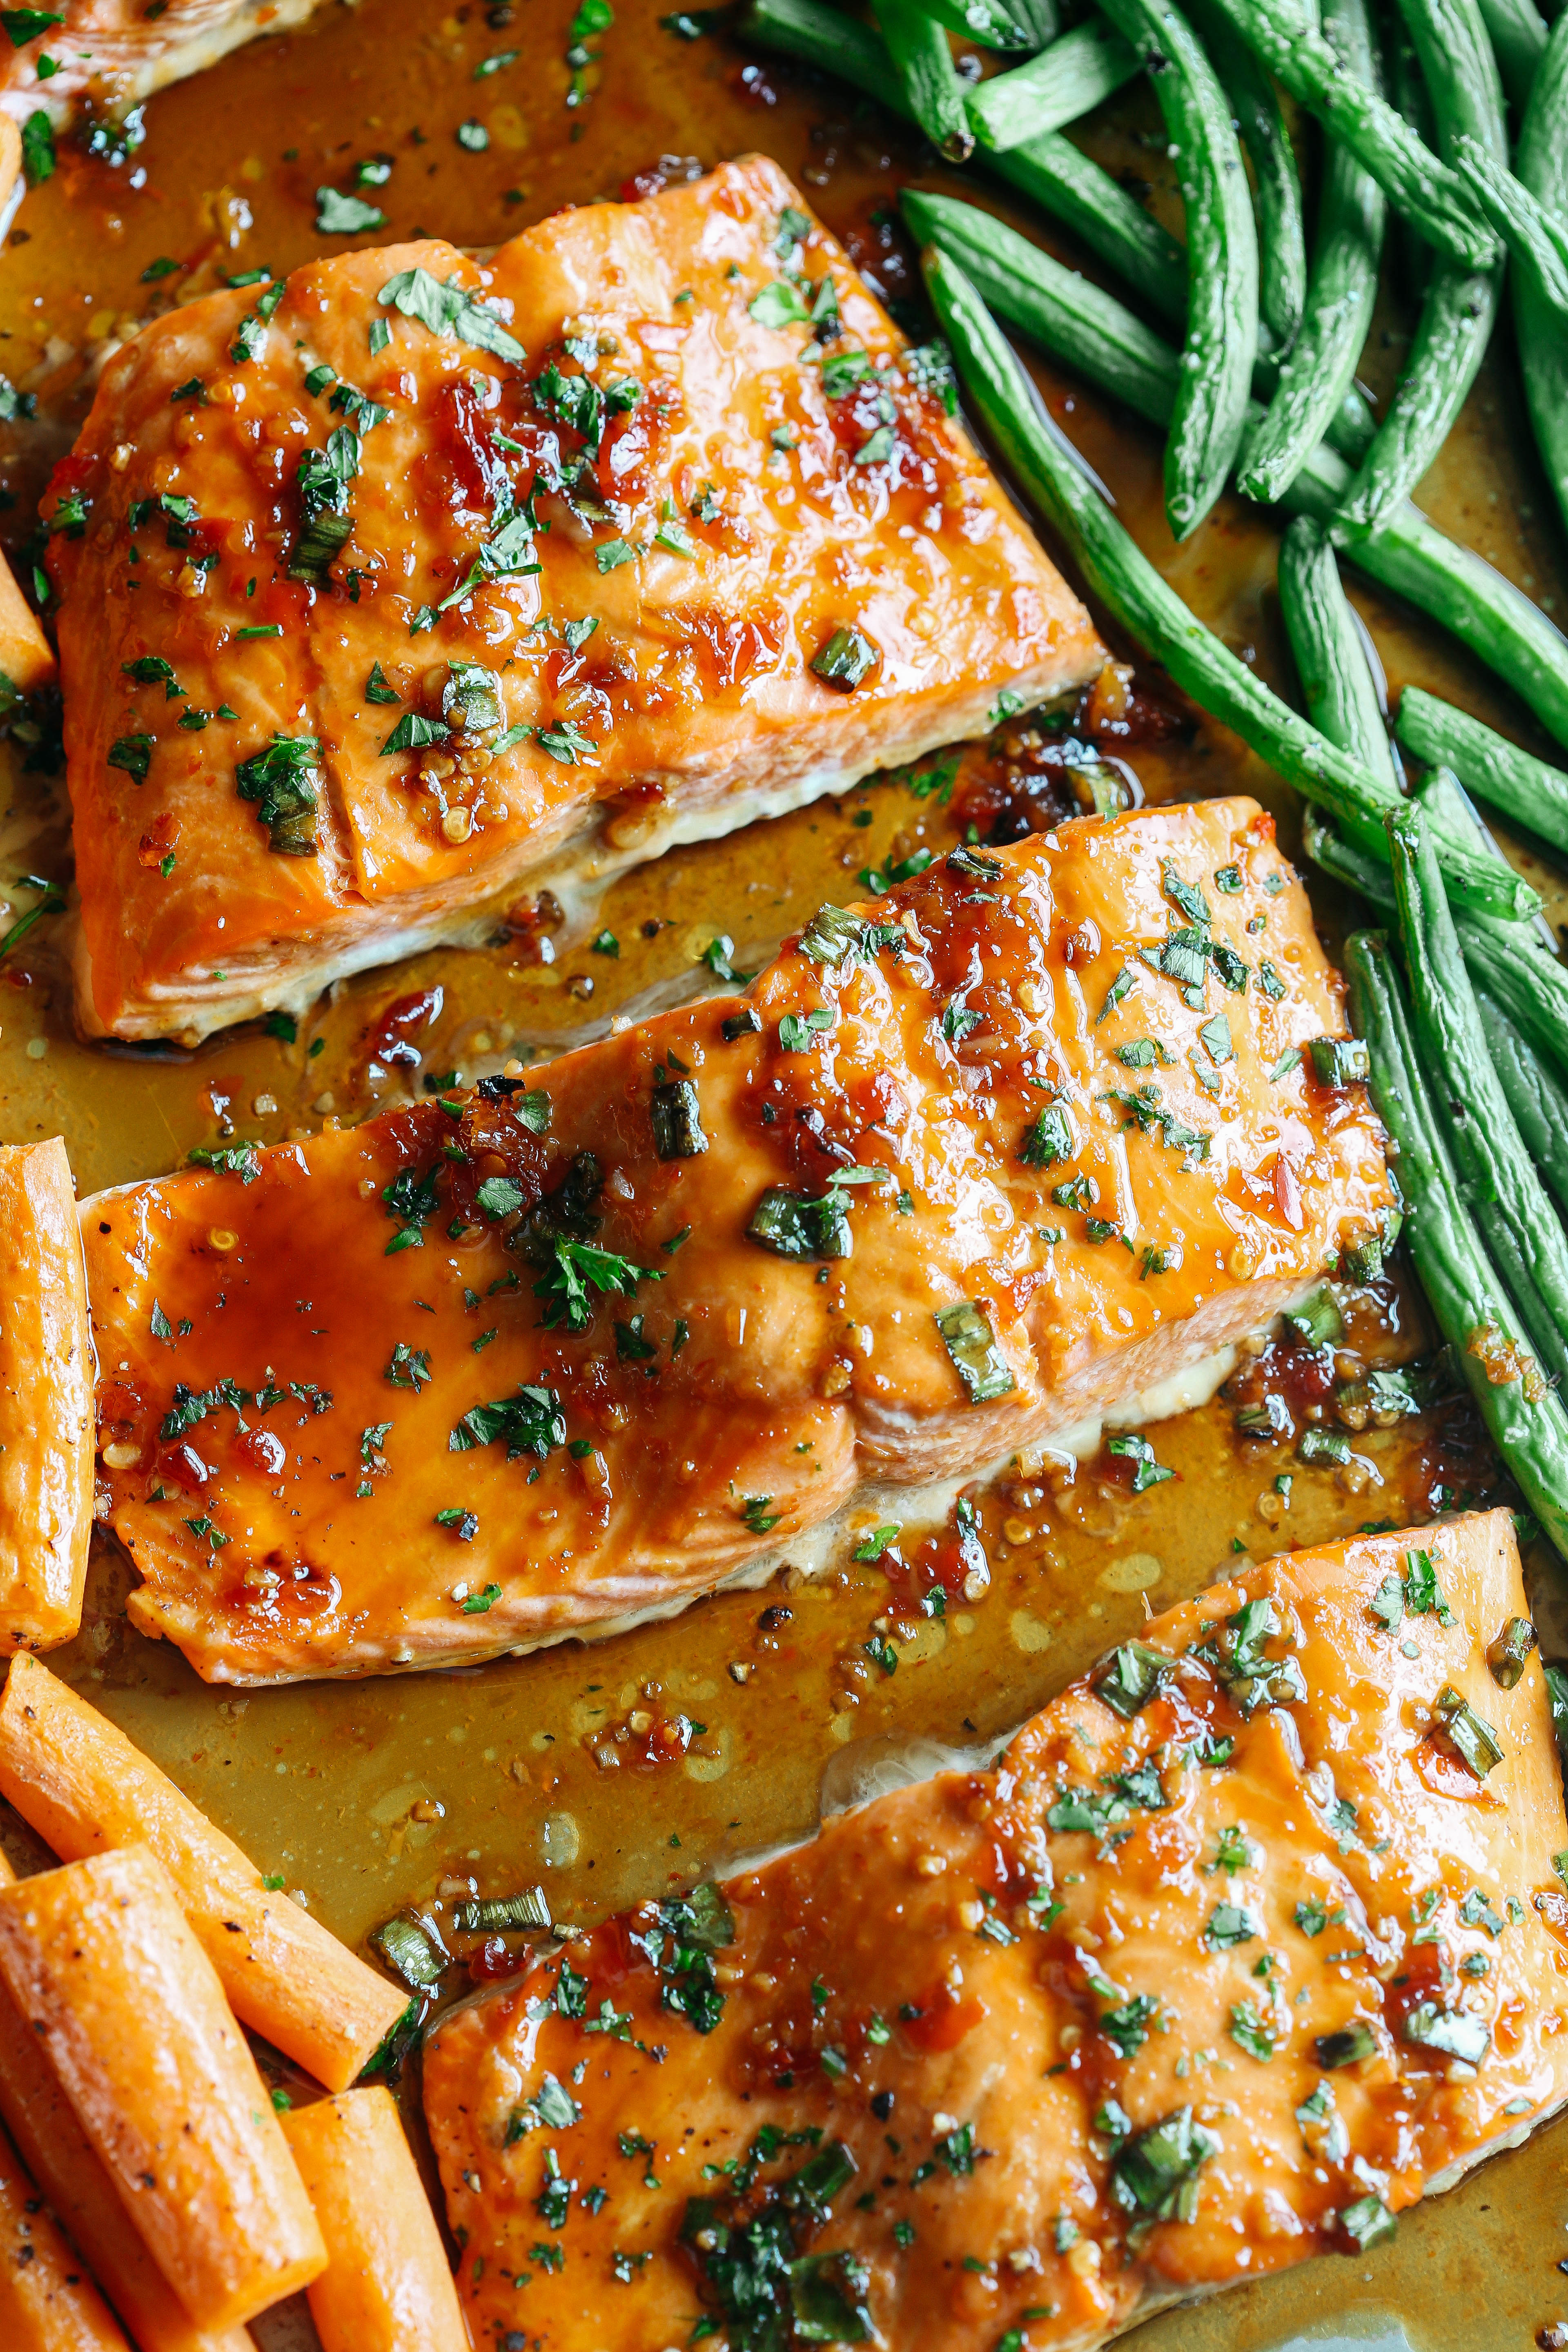 This Sheet Pan Ginger Soy Glazed Salmon makes the perfect weeknight dinner that’s quick, healthy and easily made all on one pan!